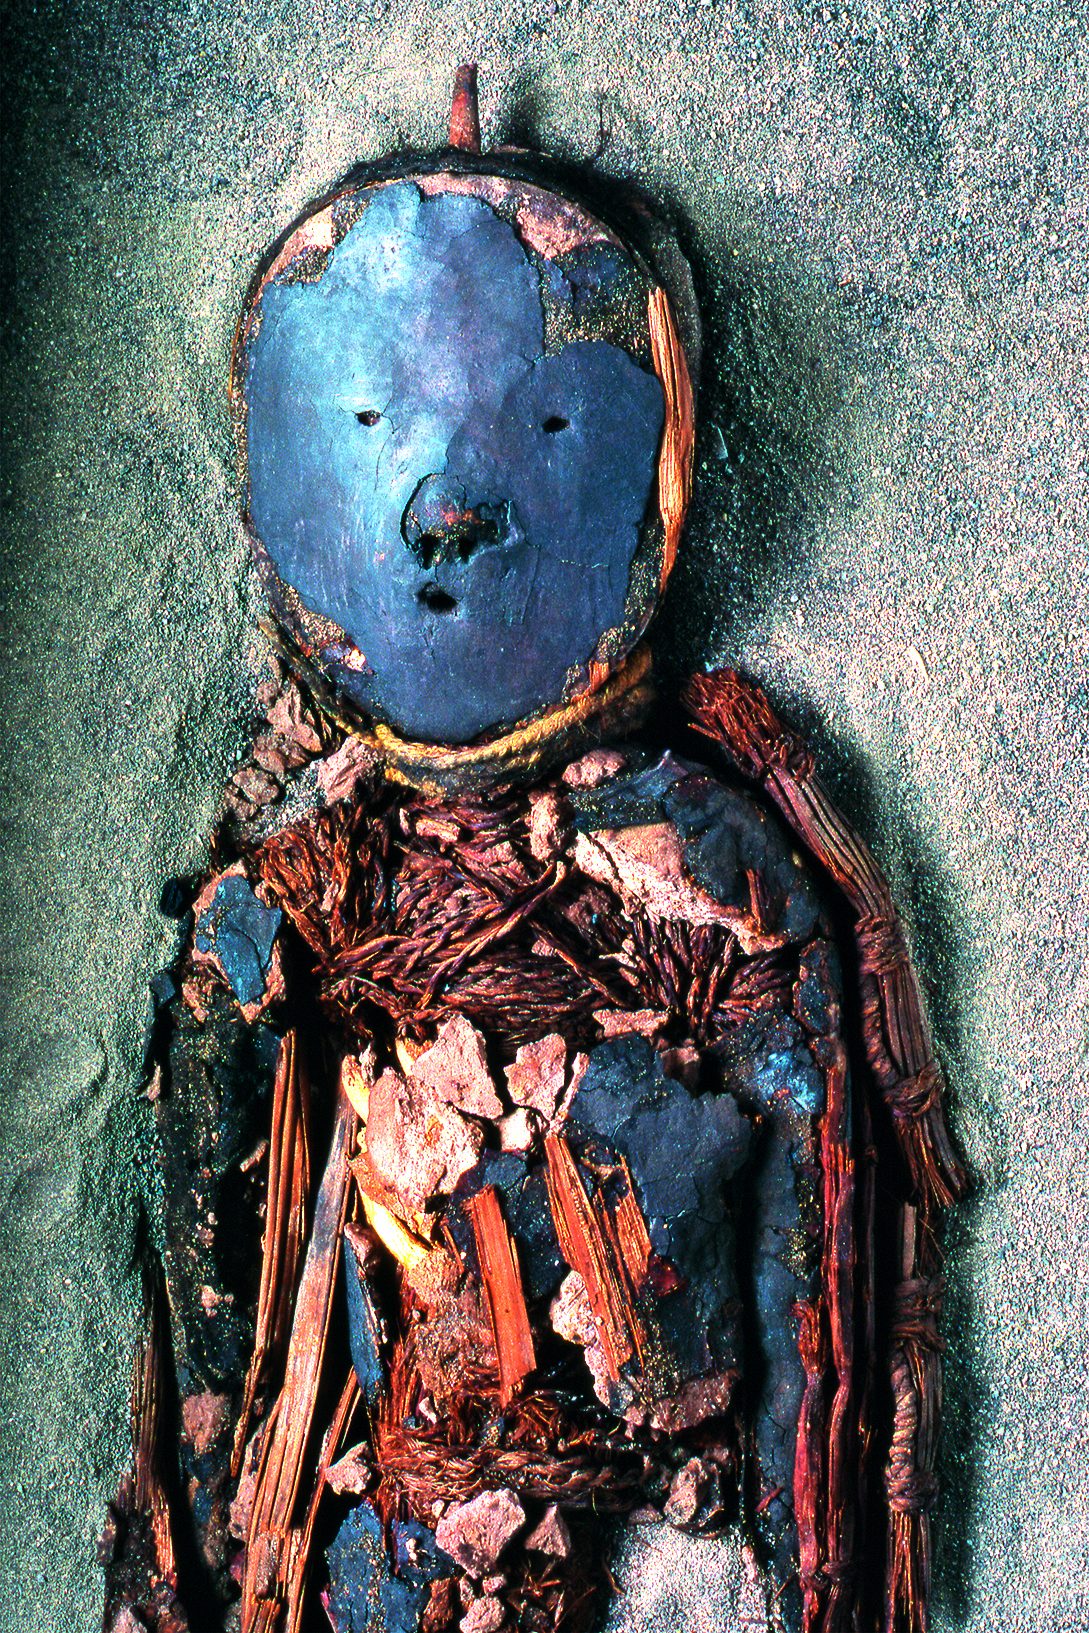 An image of a mummy with a bright blue mask covering the face. The internal organs are exposed.